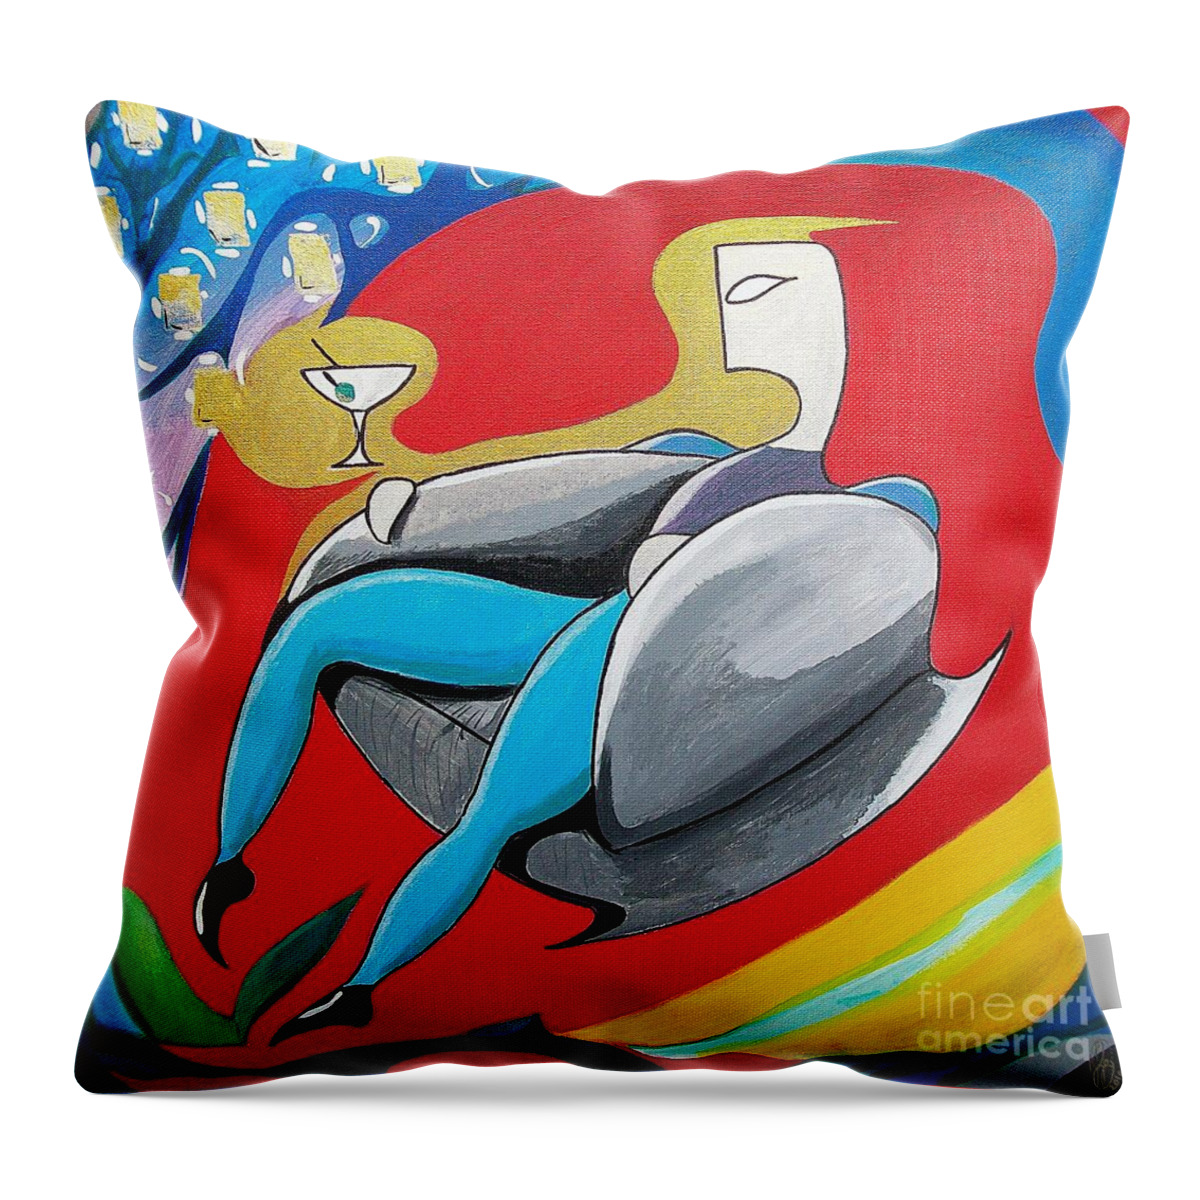 Abstract Throw Pillow featuring the painting Man Sitting in Chair by John Lyes